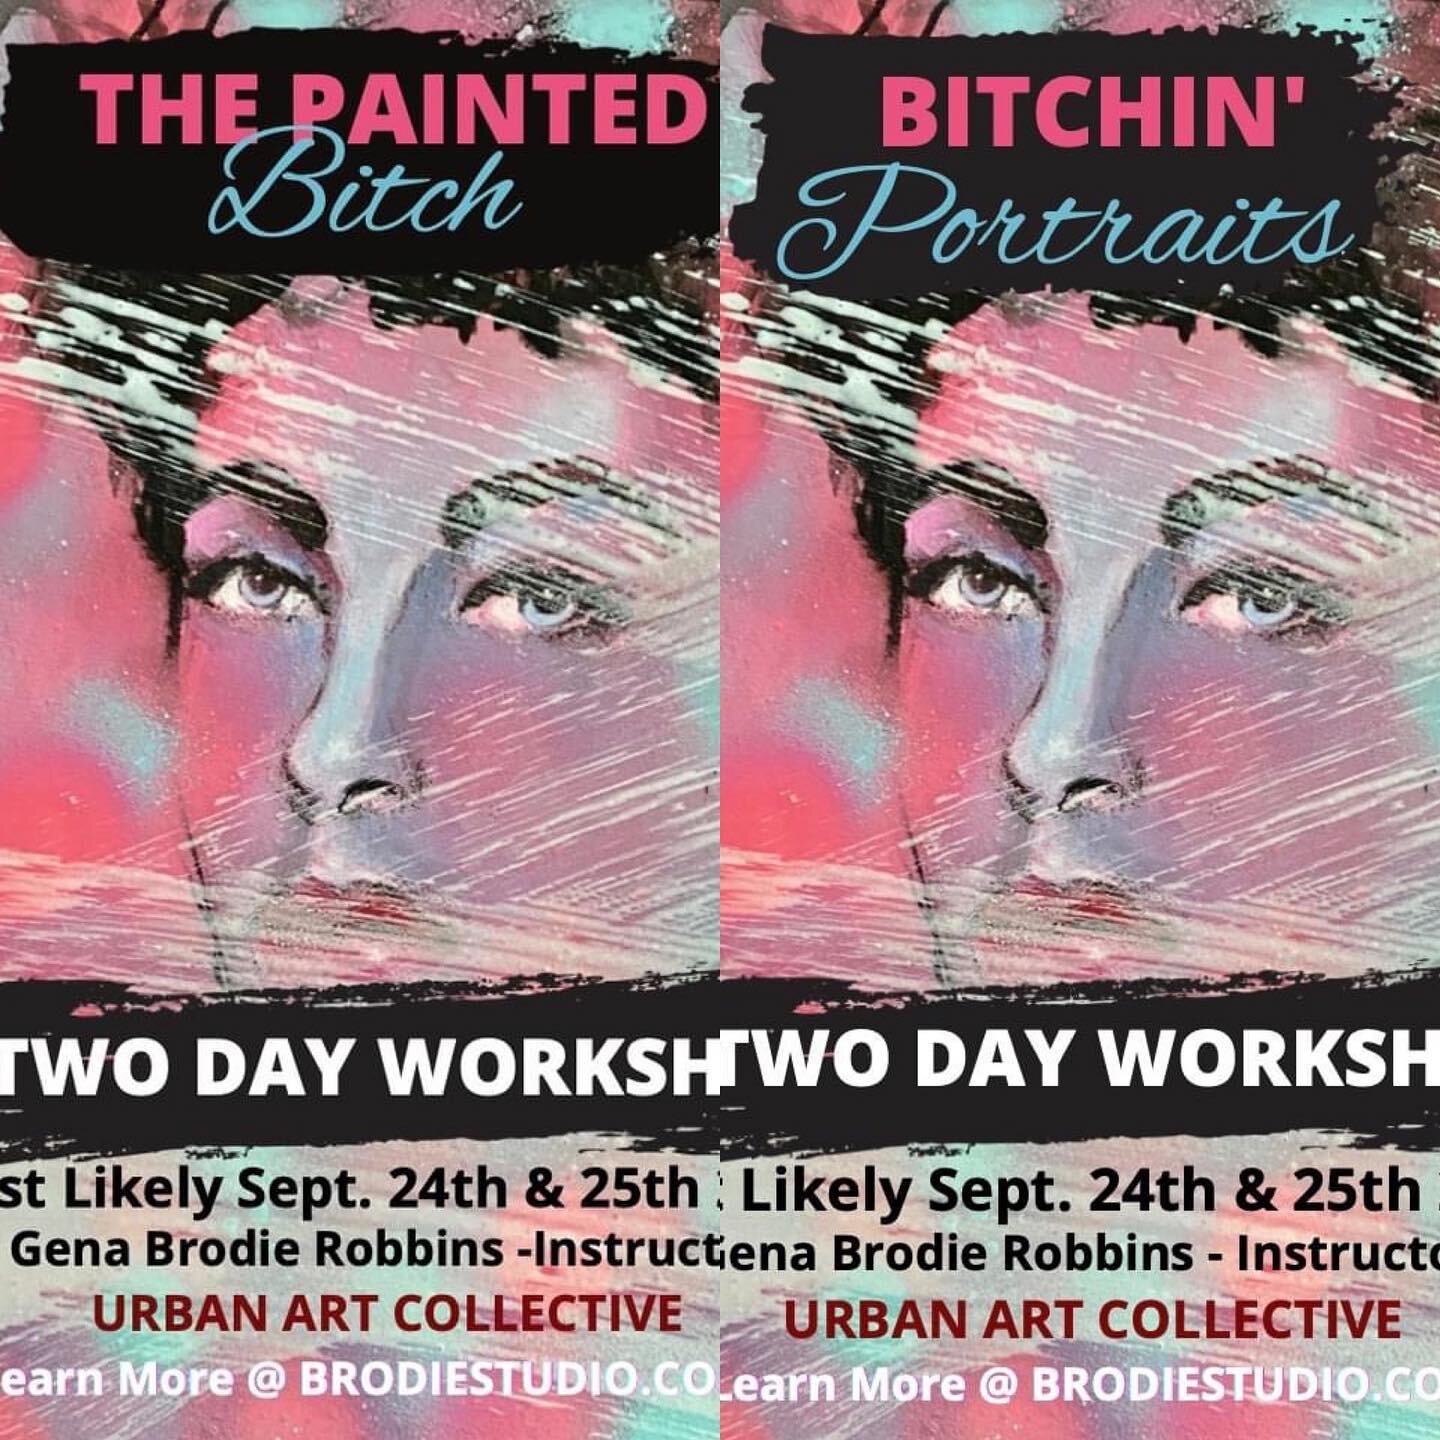 HELP! Which Wording Do You Like Better for My Workshop Poster? Have a BETTER title? If you are familiar with my RBF series of portraits then you will understand the basis for the titles. The workshop will focus on contemporary, bold and brazen method